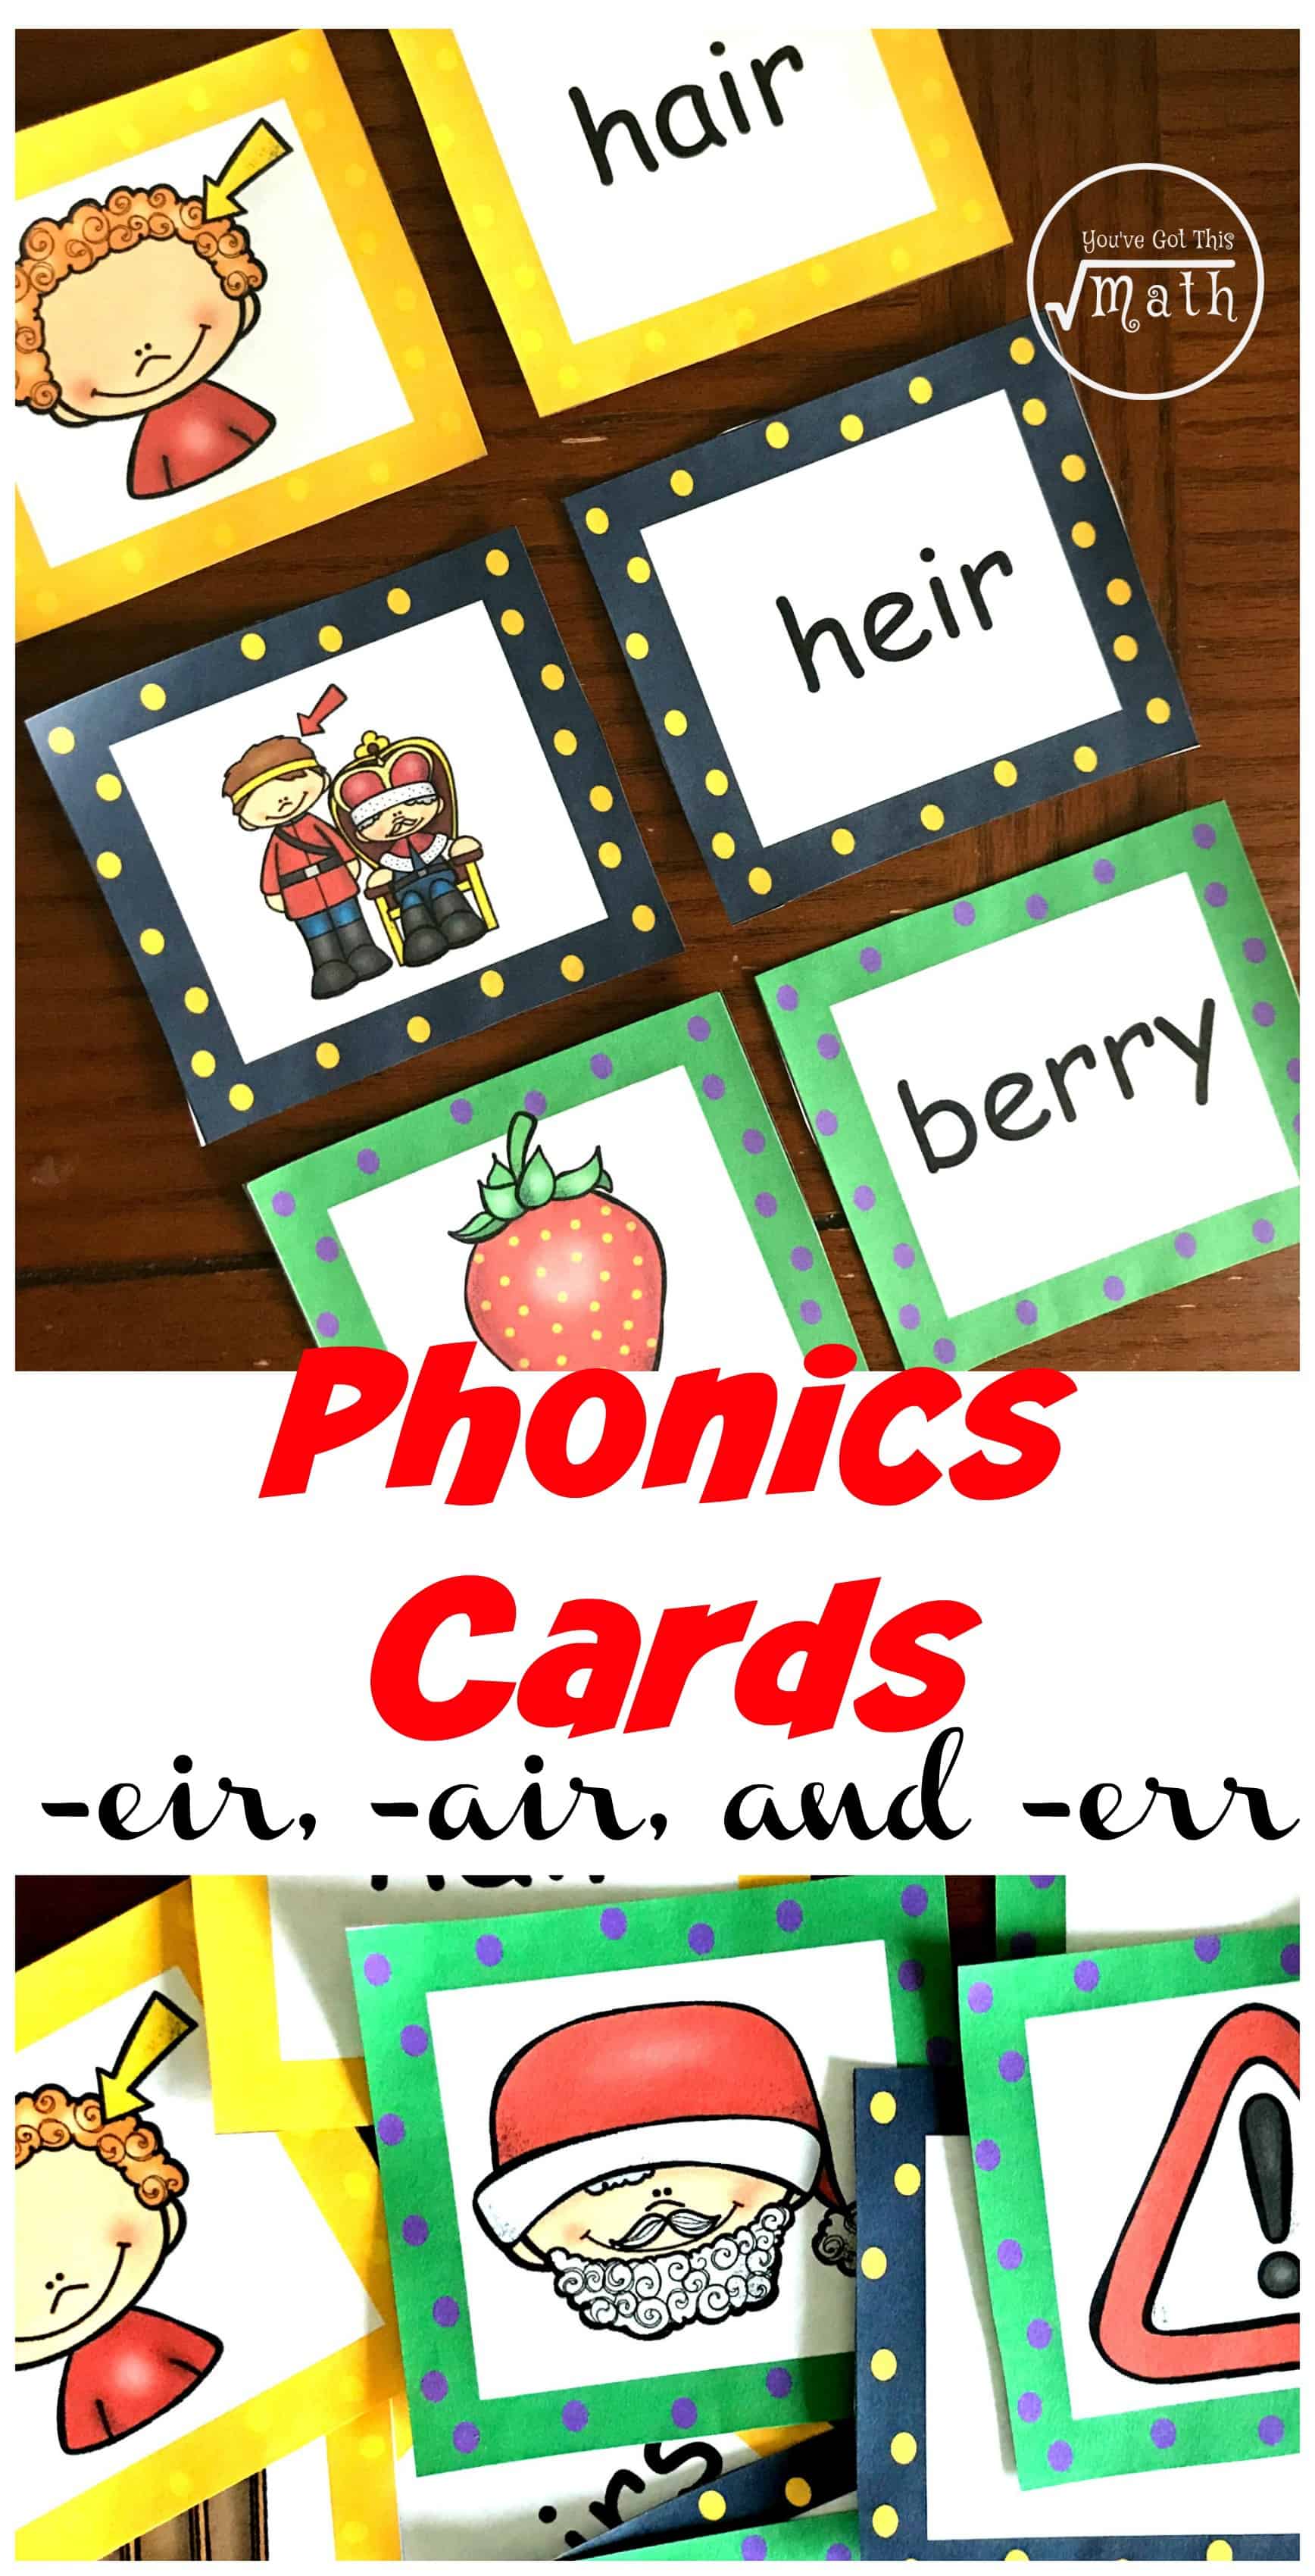 Grab these err, eir, and air word family cards. There are over five ways to use these bright, colorful cards that will get kids reading and spelling these tricky words.